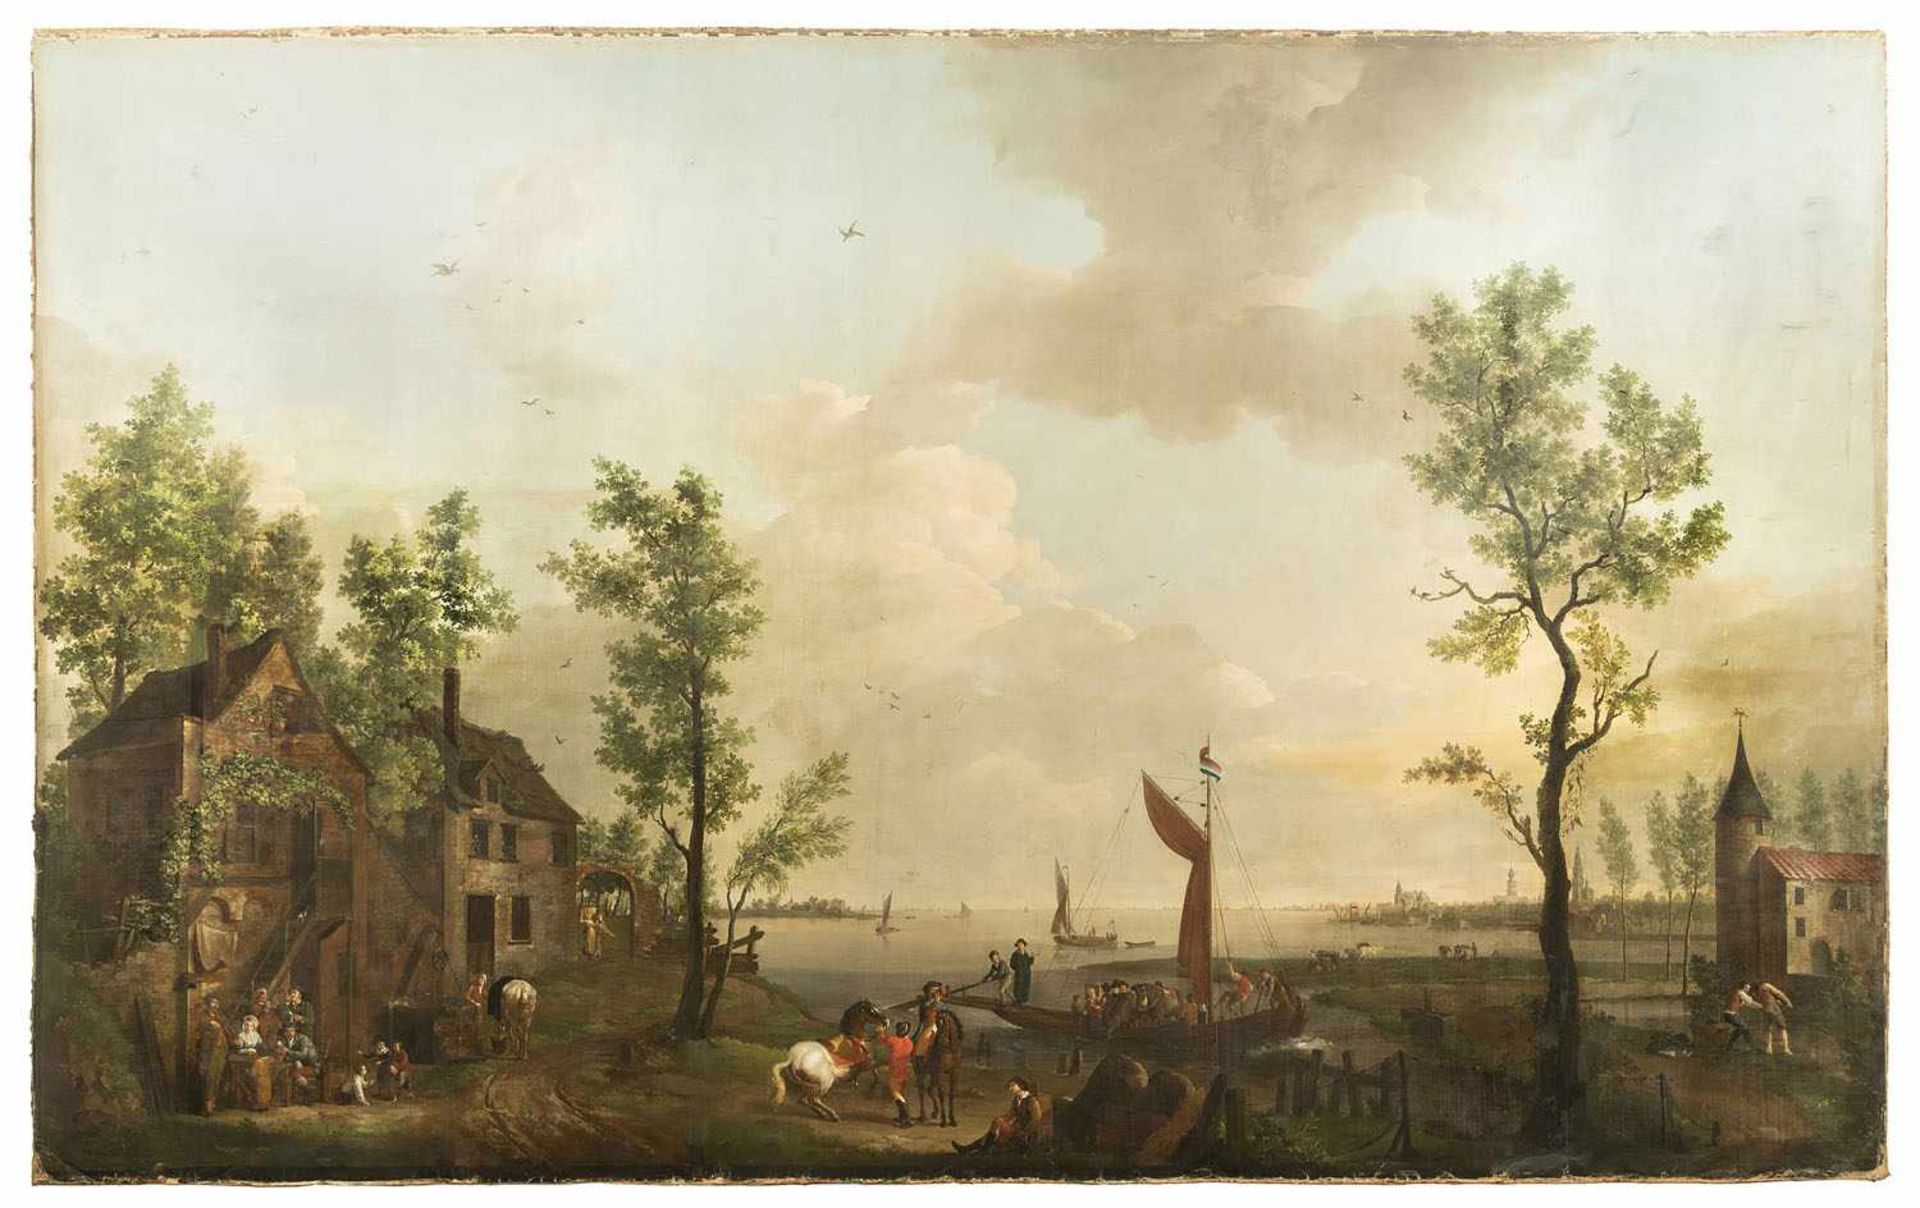 BREE, MATHIEU IGNACE VAN (1773-1839). Panoramic view of River Scheldt with the town silhouette of